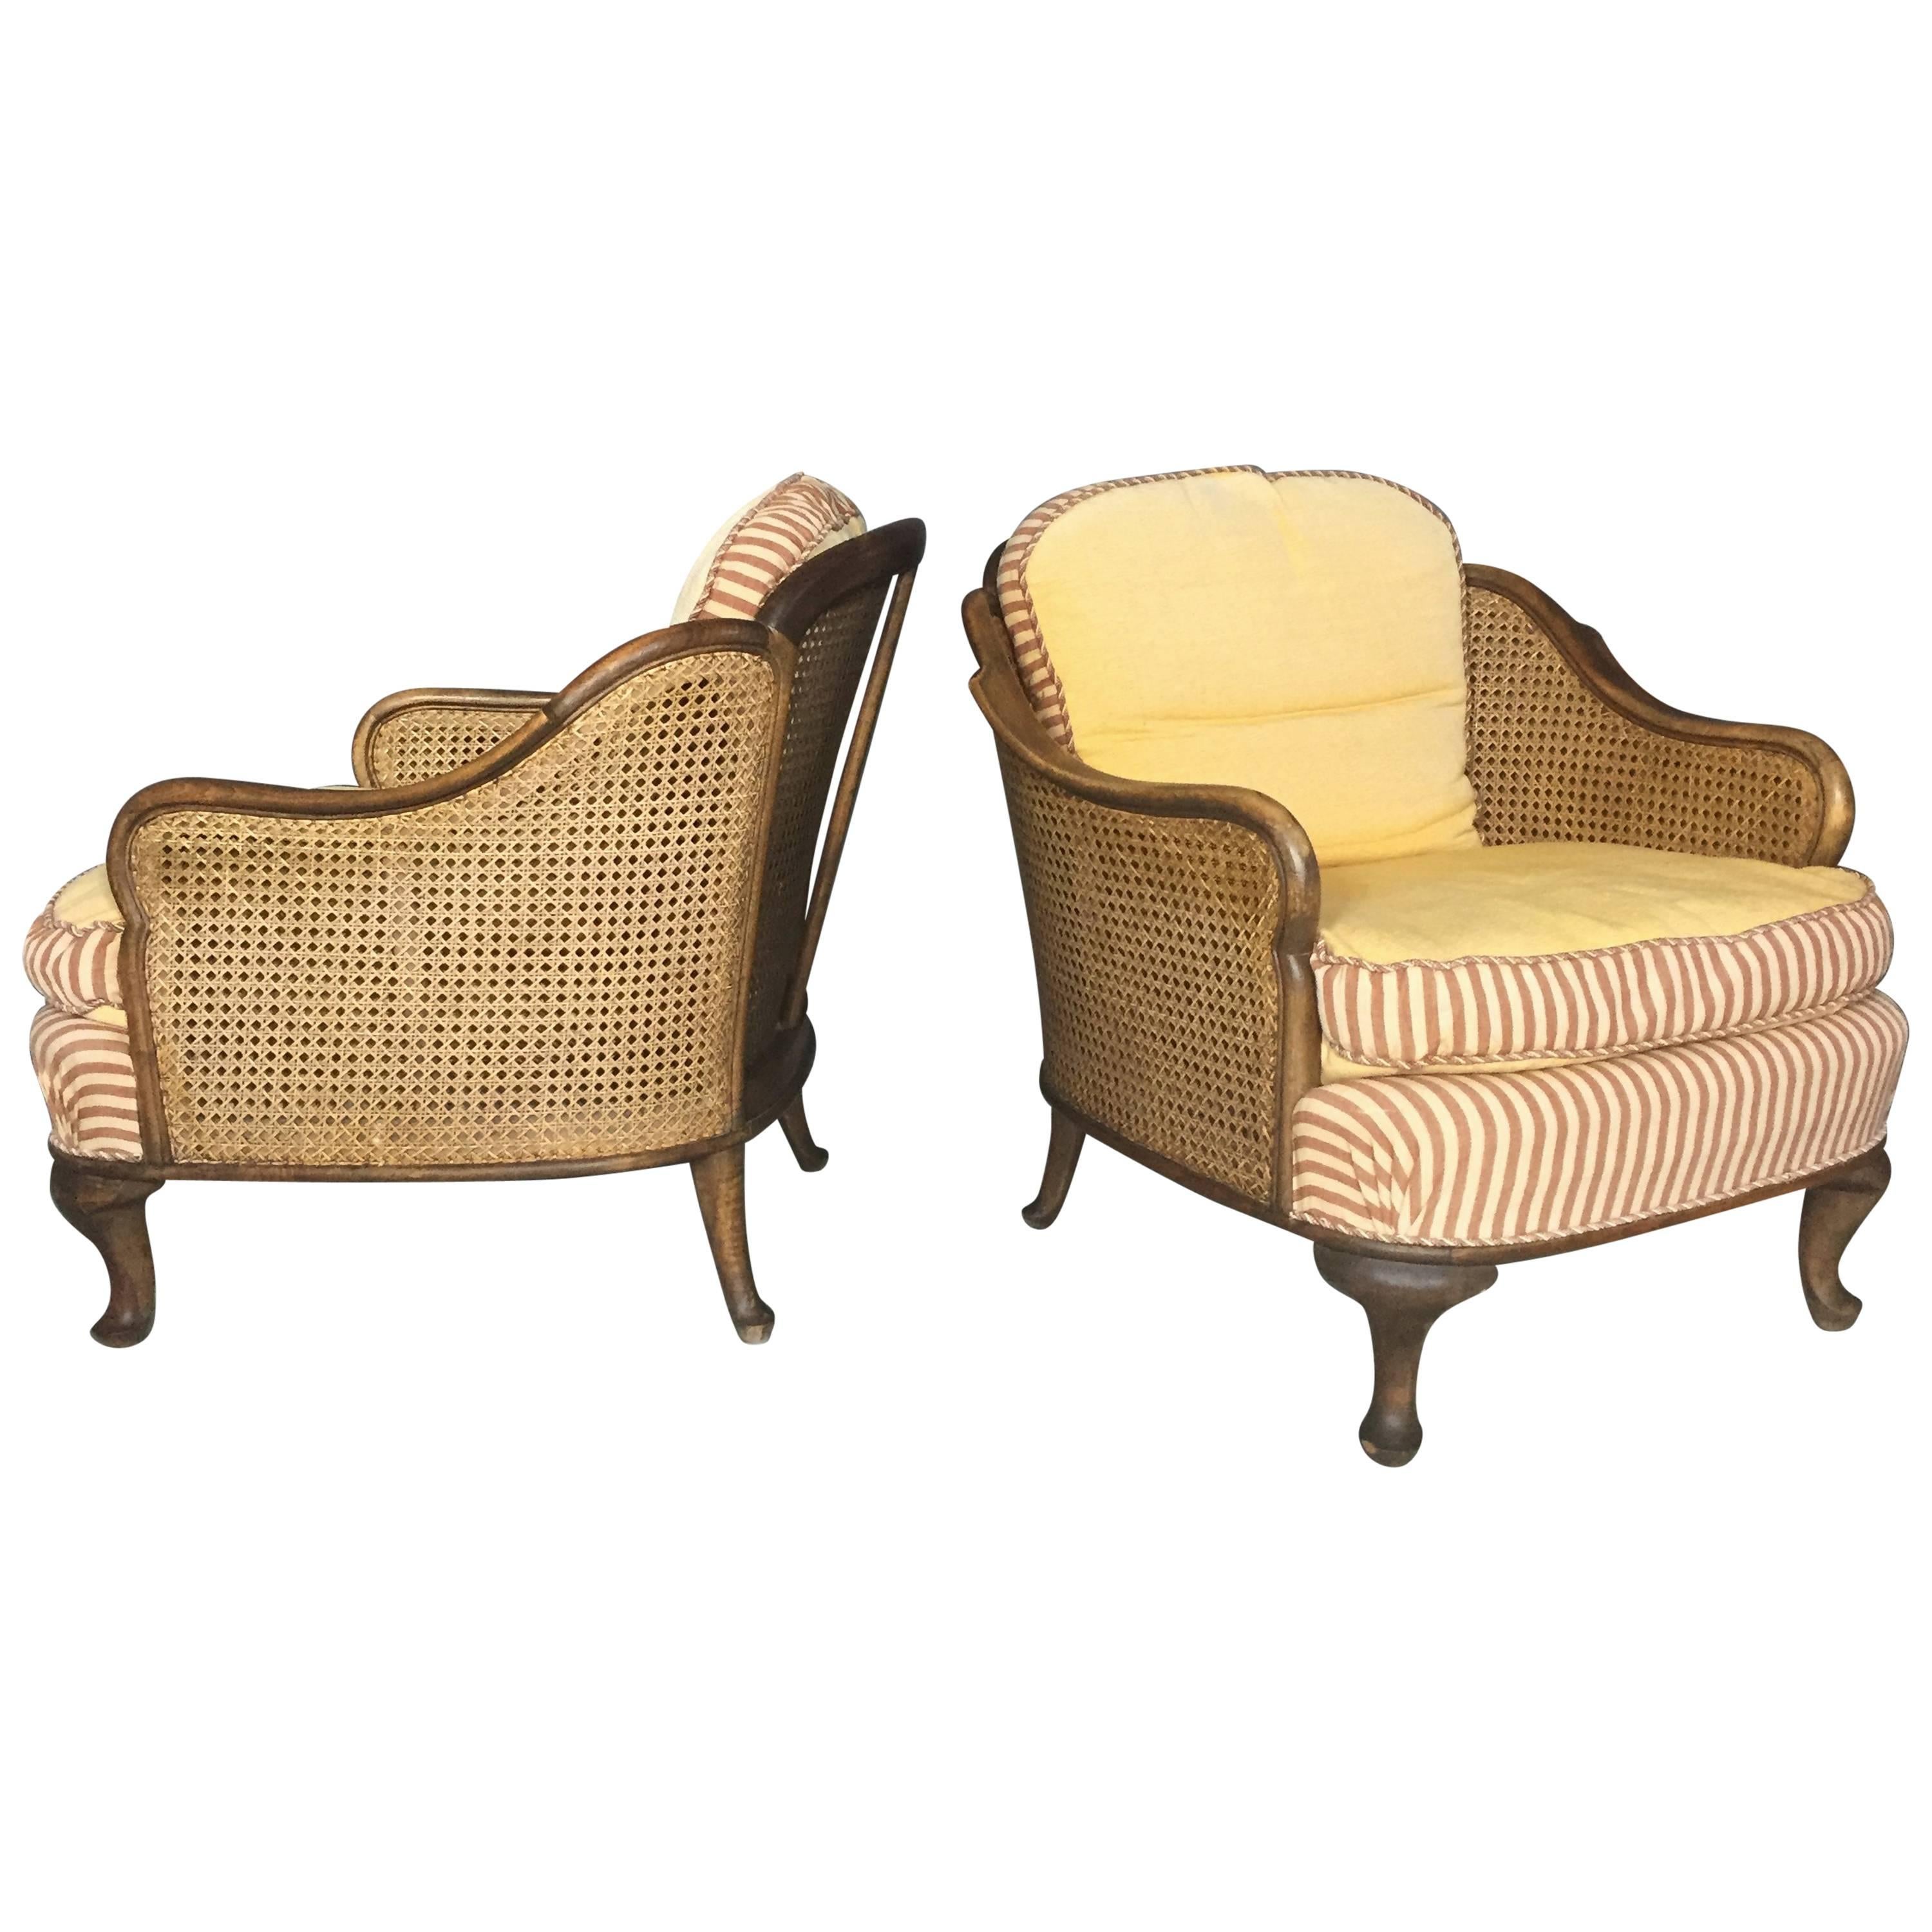 Pair of Bergere Tub Chairs, Walnut and Cane, Sweden, 1930s